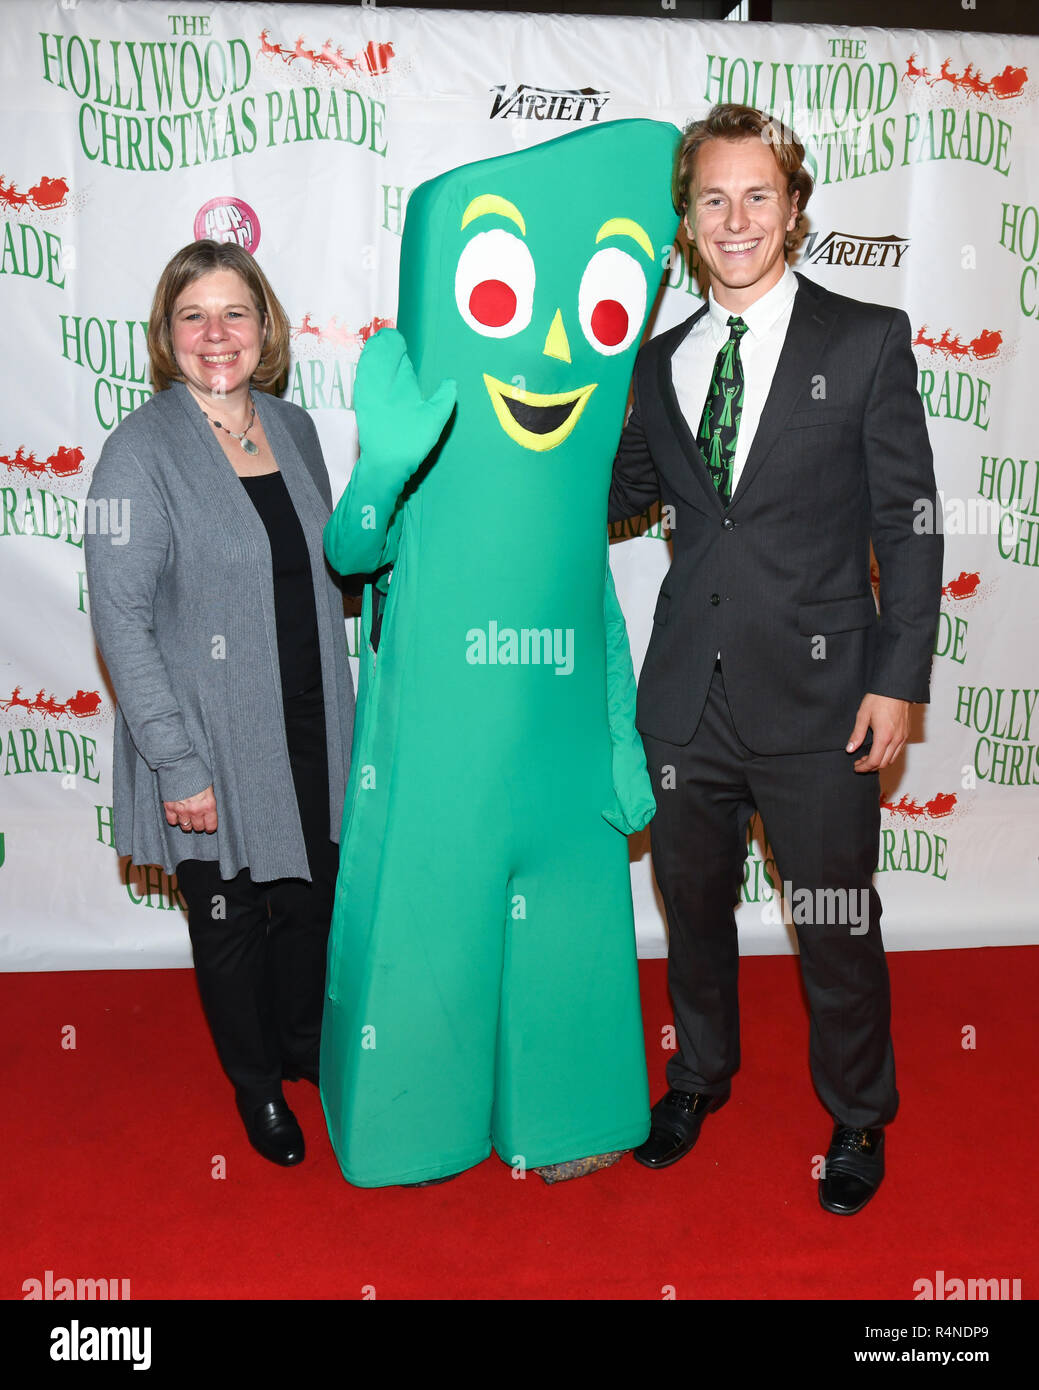 Gumby arrives at the 87th Annual Hollywood Christmas Parade in Hollywood California on November 25, 2018. Stock Photo